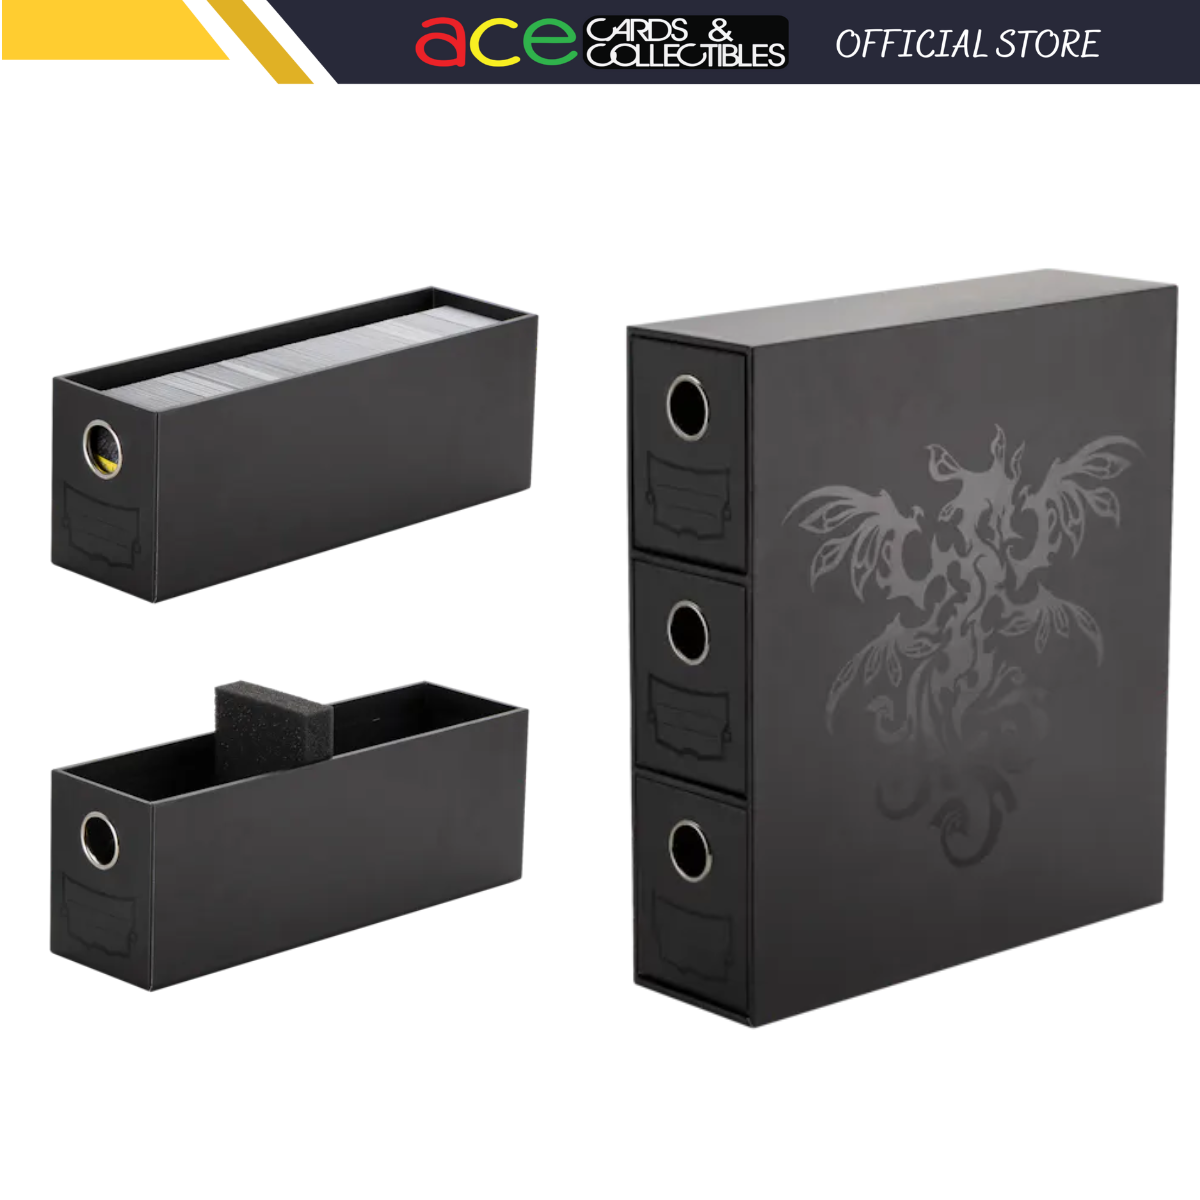 Dragon Shield Sleeve Fortress Card Card Drawers -Slipcase Binder- "Black"-Dragon Shield-Ace Cards & Collectibles